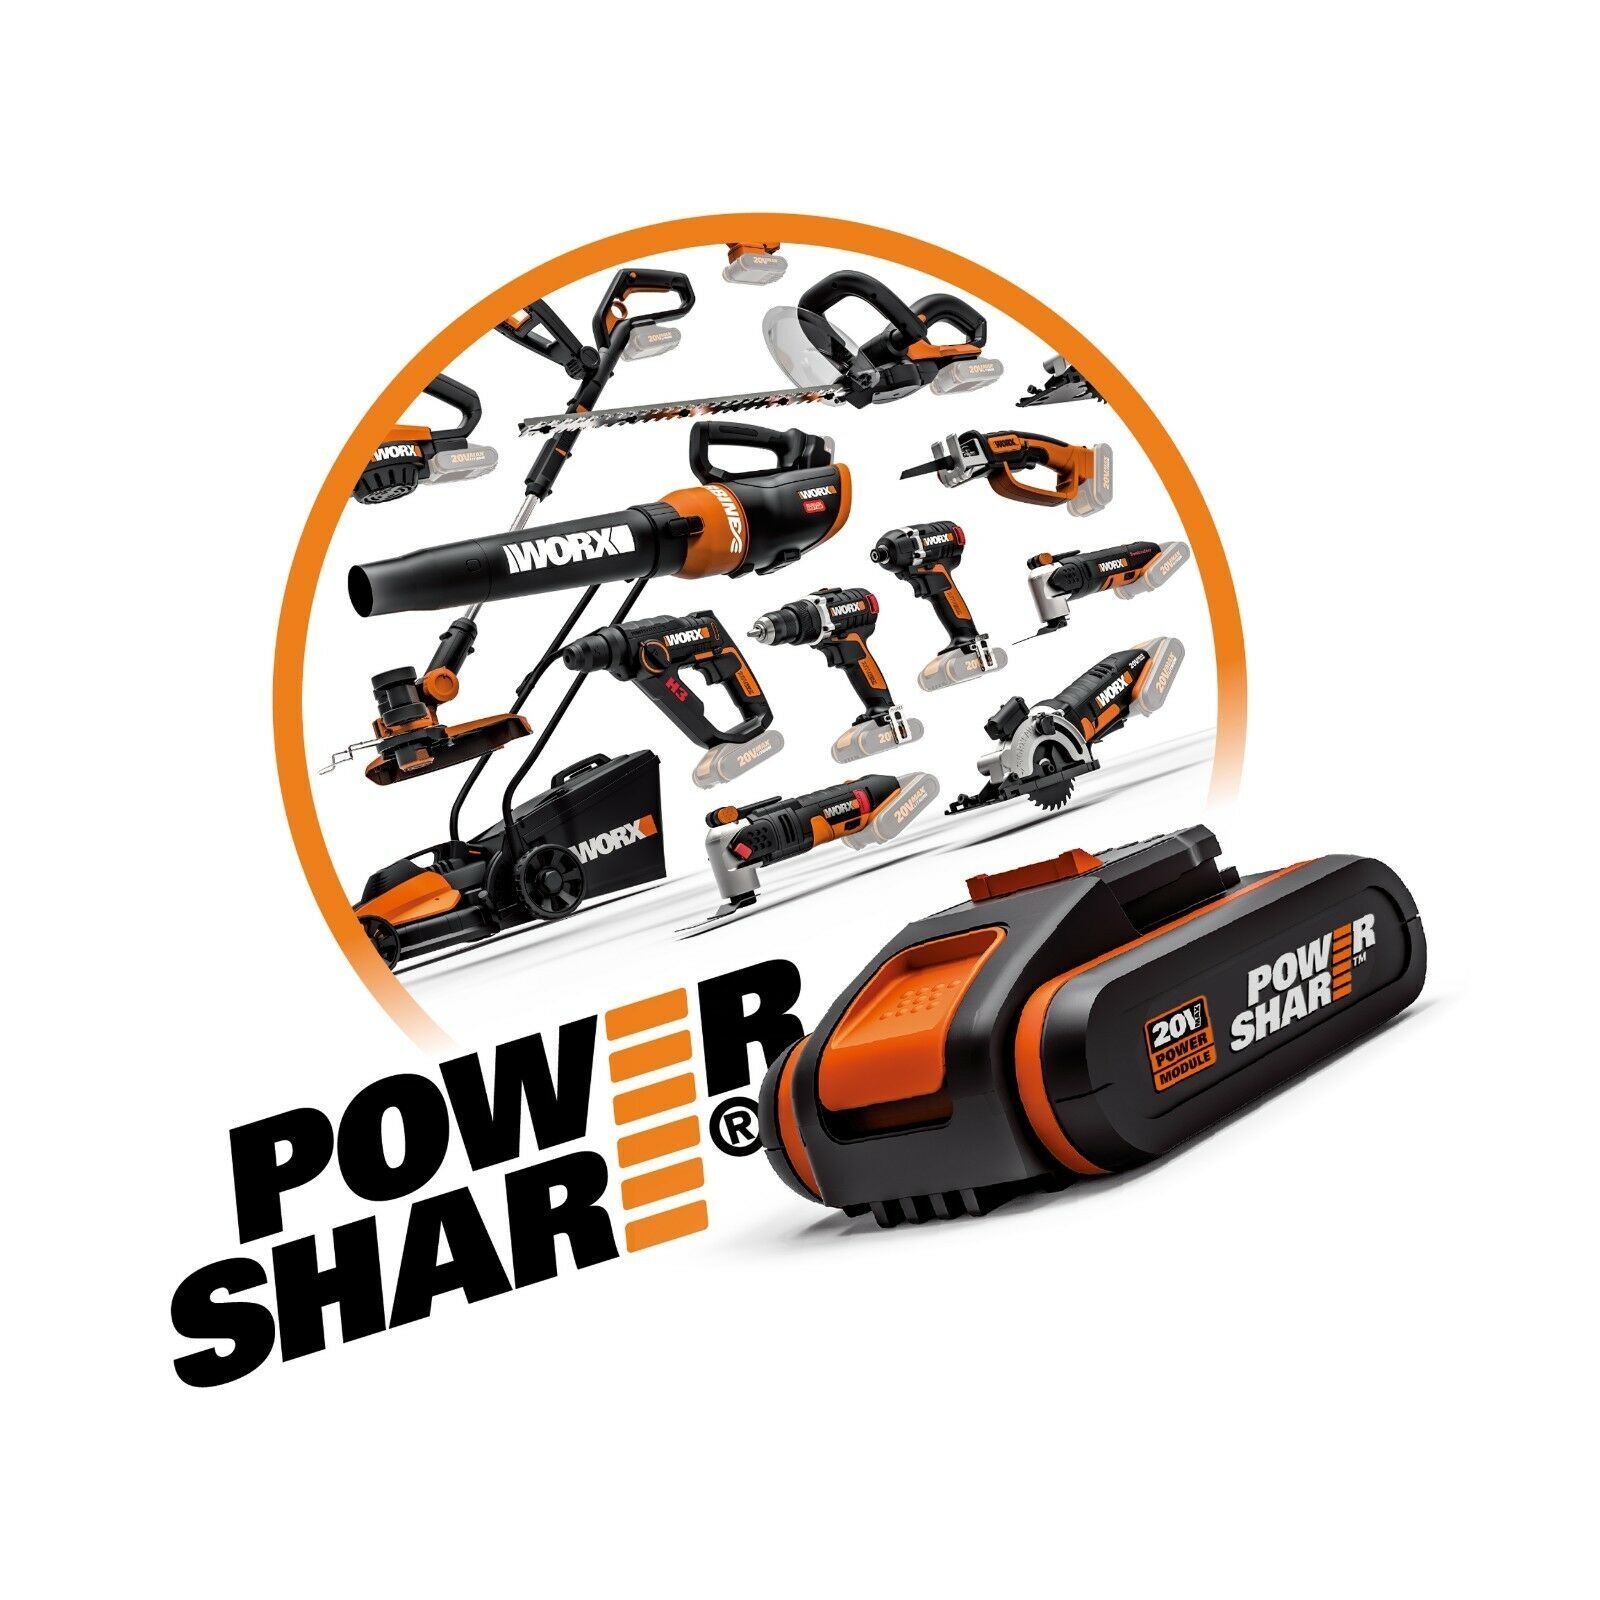 WORX 20V Cordless JigSaw Skin (POWERSHARE Battery / Charger not incl.) - WX543.9